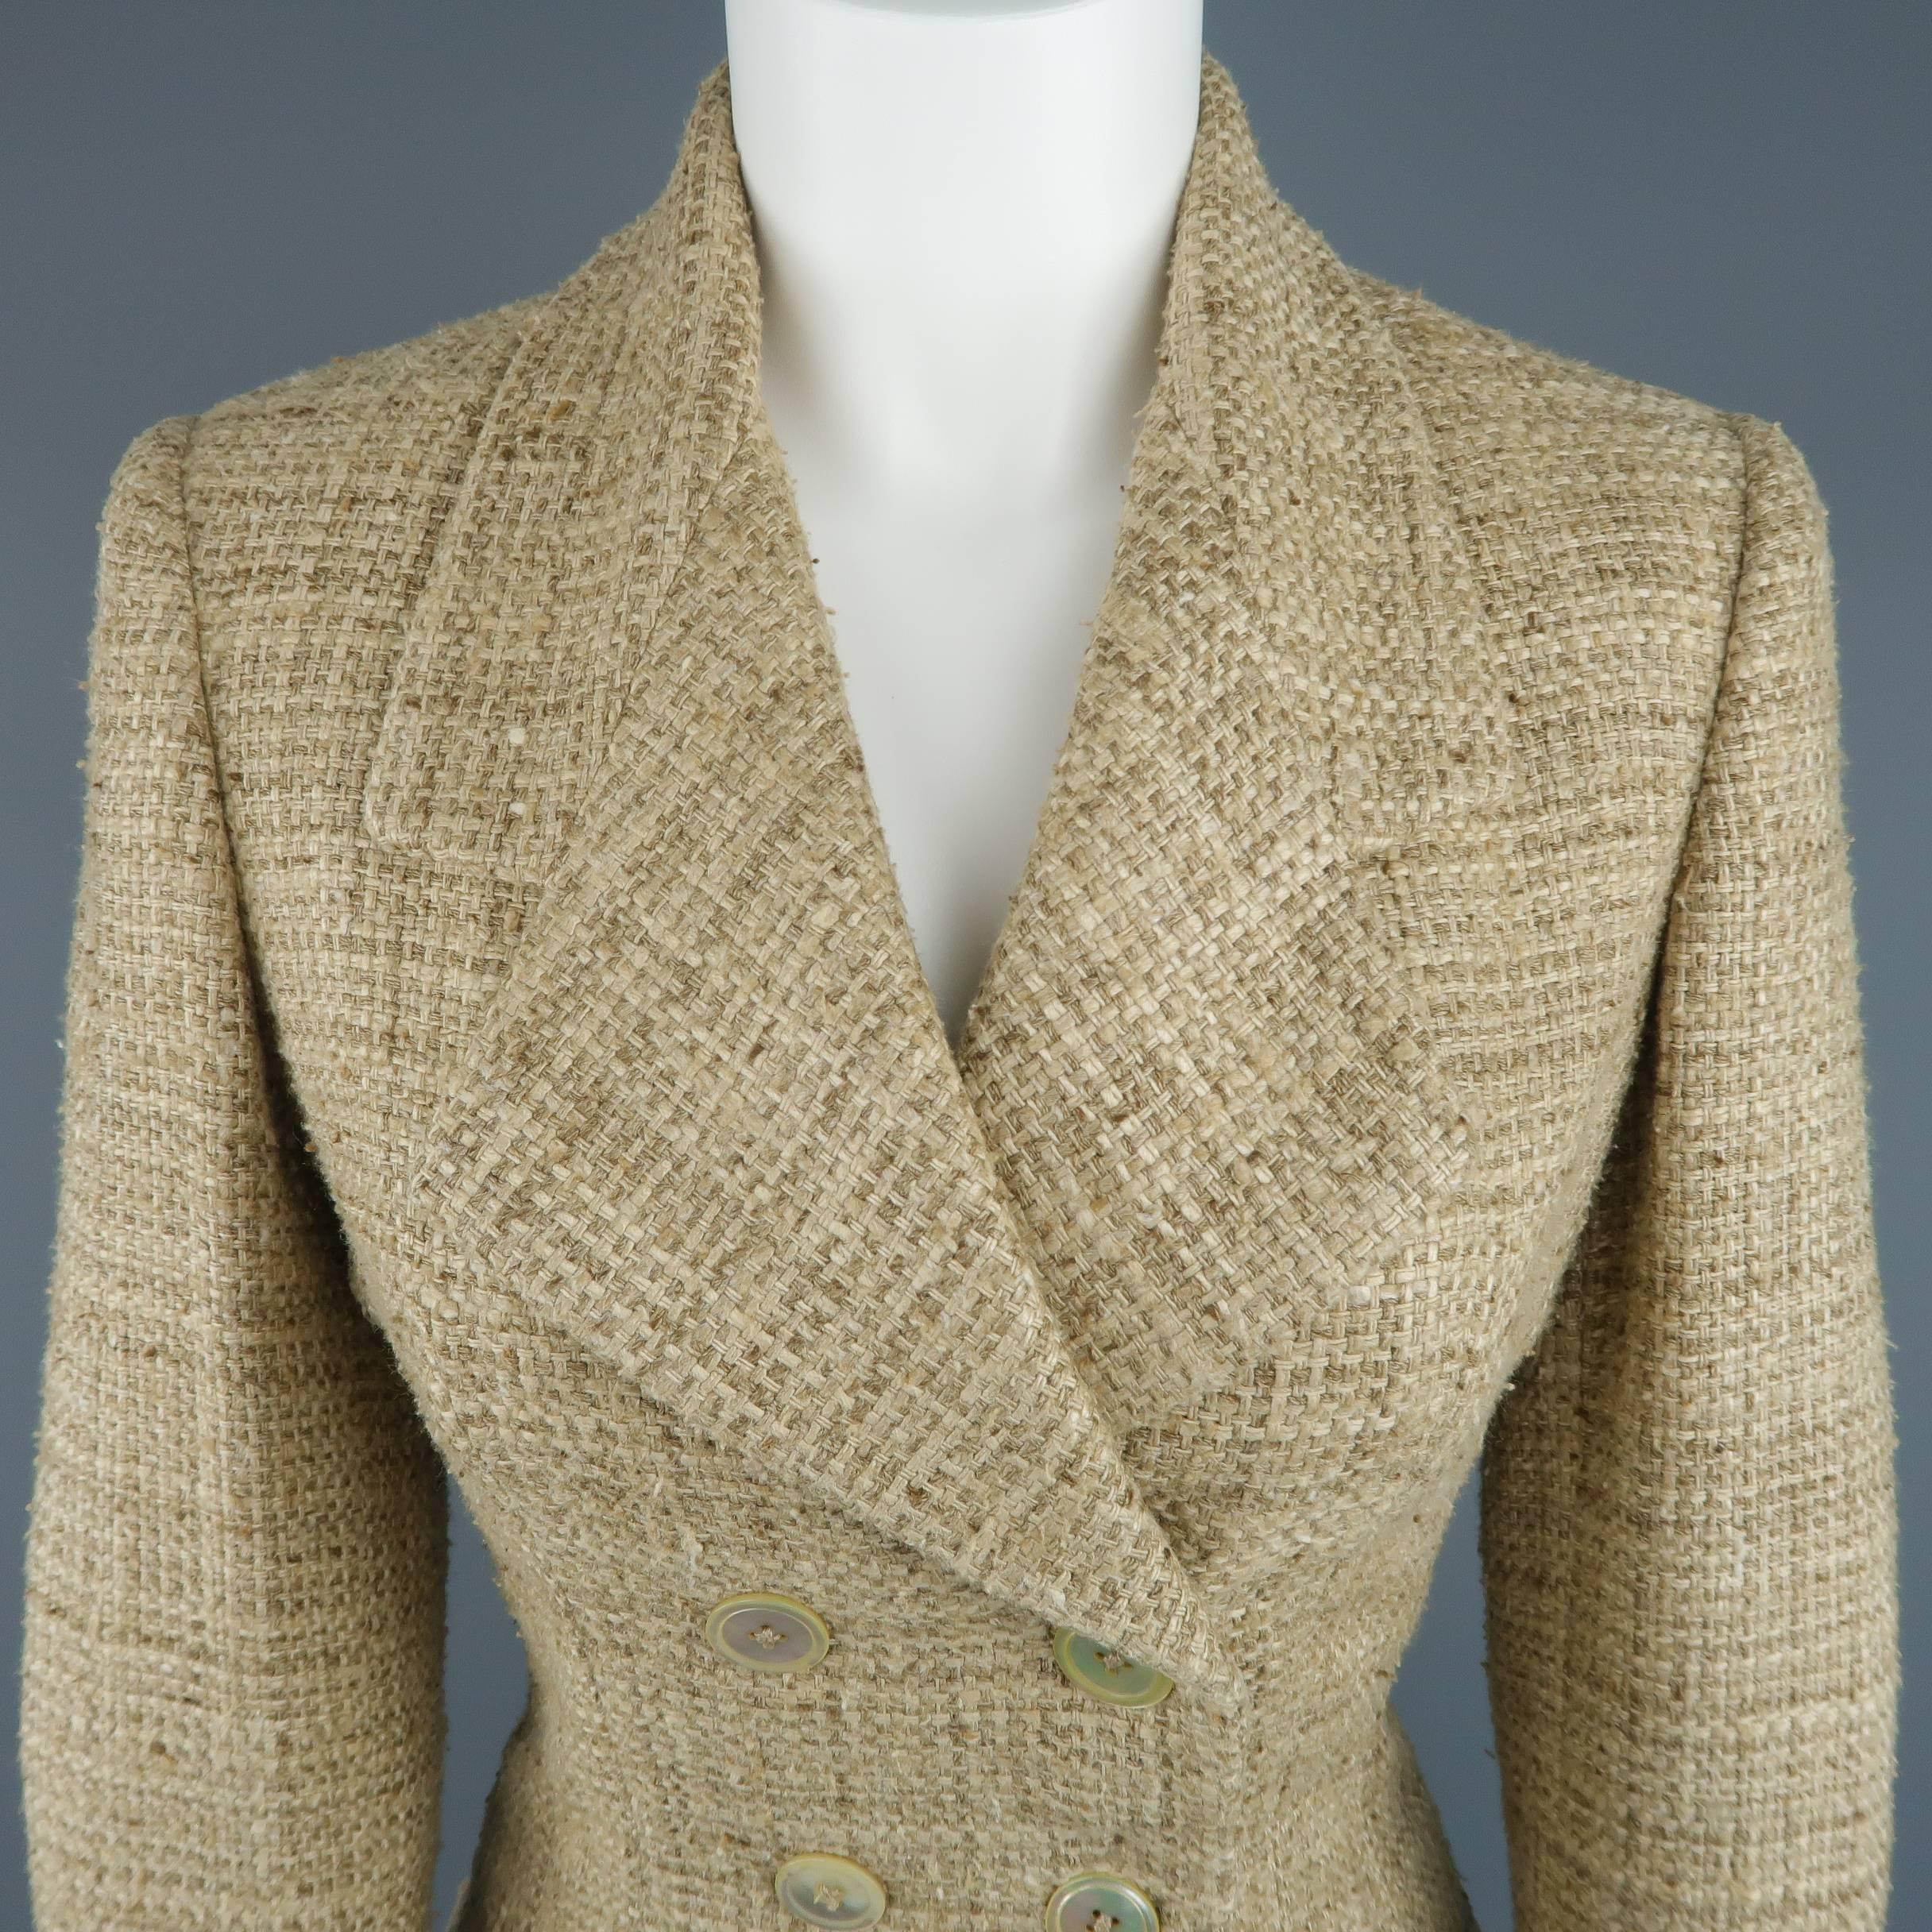 RALPH LAUREN COLLECTION jacket comes in a multi-tonal beige woven silk fabric and features a double breasted front and faux button cuff sleeves. Made in Italy.
 
Excellent Pre-Owned Condition.
Marked: US 8
 
Measurements:
 
Shoulder: 15.5 in.
Bust: